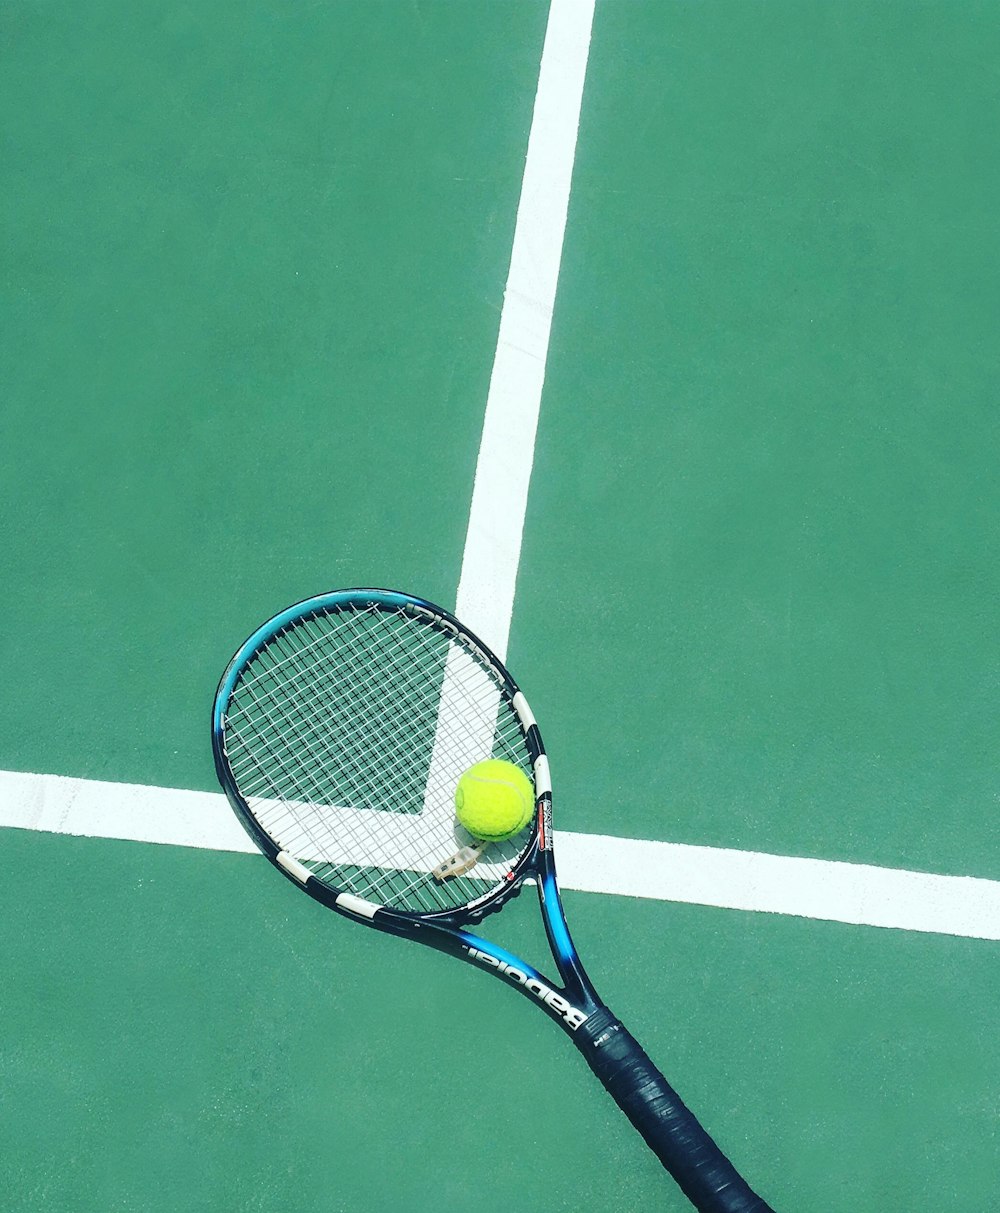  Tennis Game-How To Improve?
